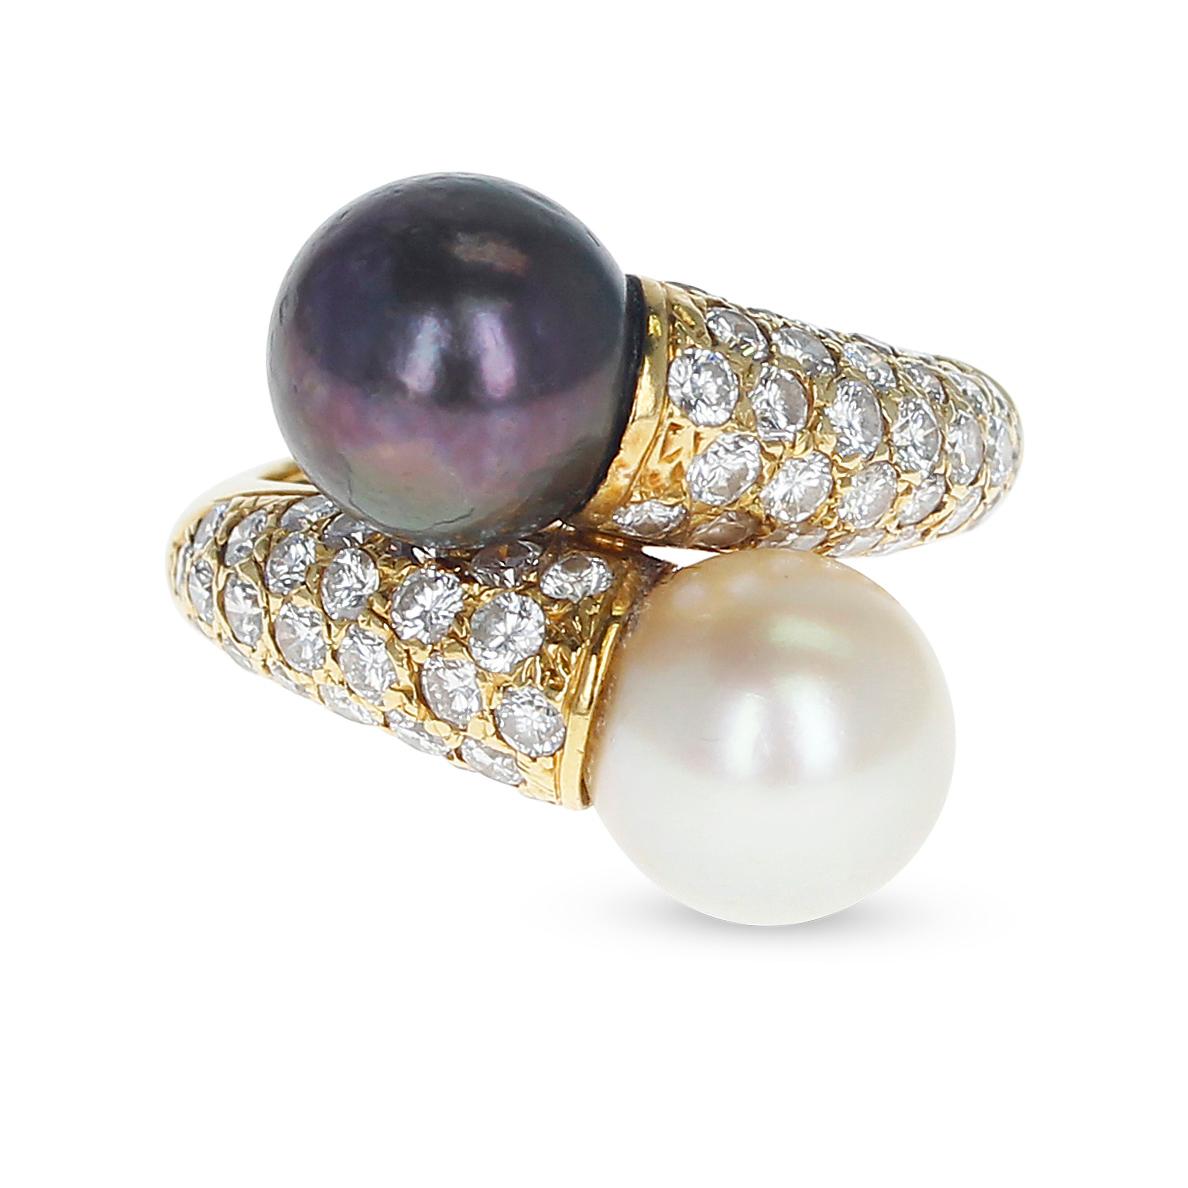 A Van Cleef & Arpels Toi Et Moi Pearl and Diamond Ring made in 18K Yellow Gold. 
The pearl size is 9.50 MM. The total weight of the ring is 9.23 grams. Ring Size US 6.
